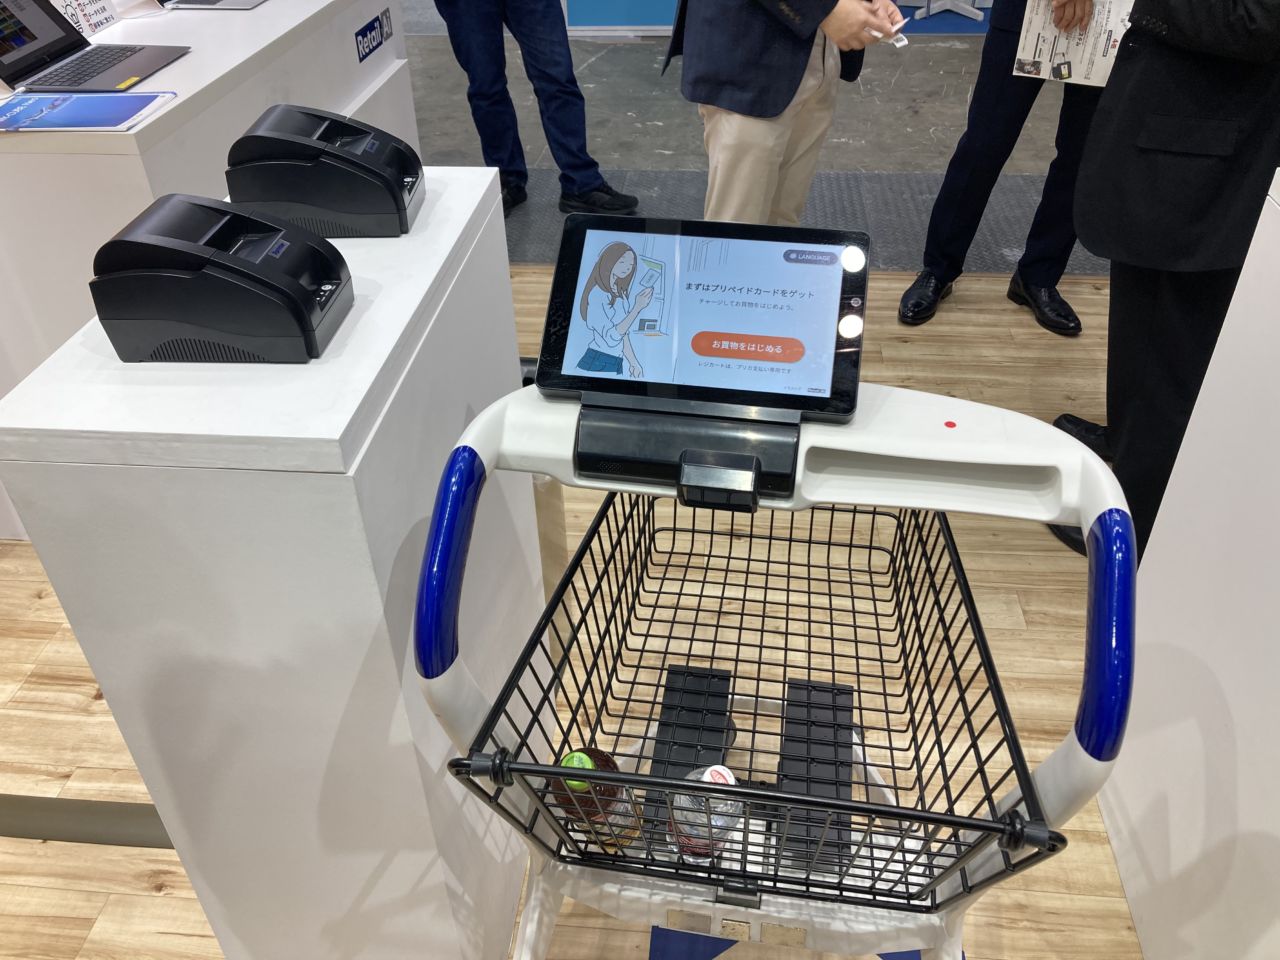 Smart cart shopping cart helps achieve friction-free physical shopping